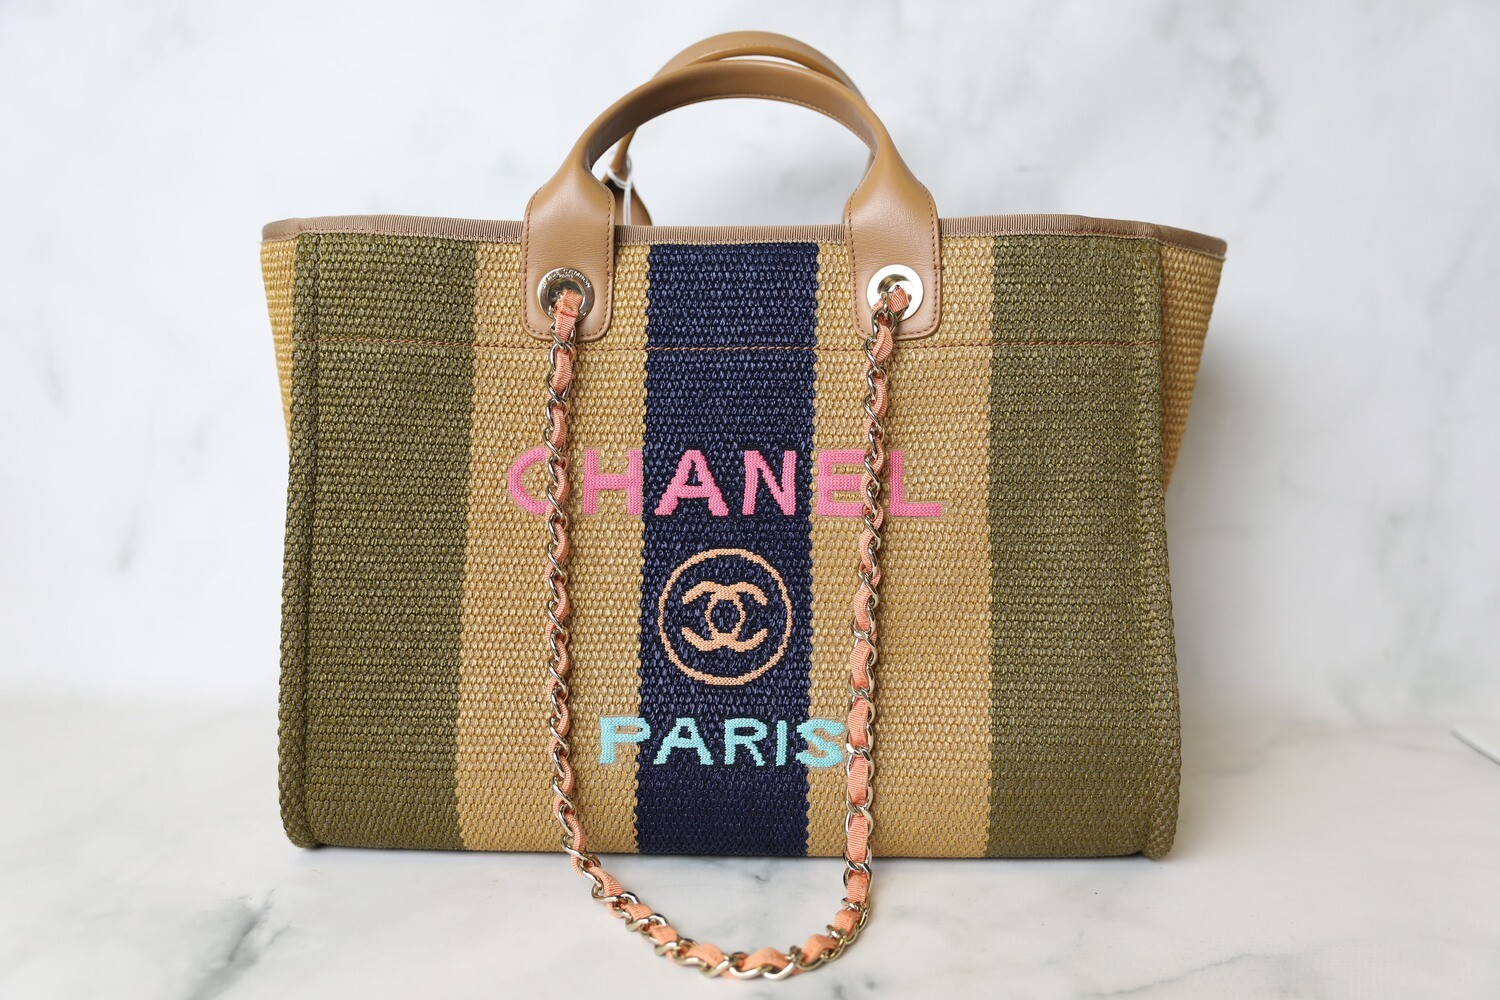 beige chanel quilted bag cc